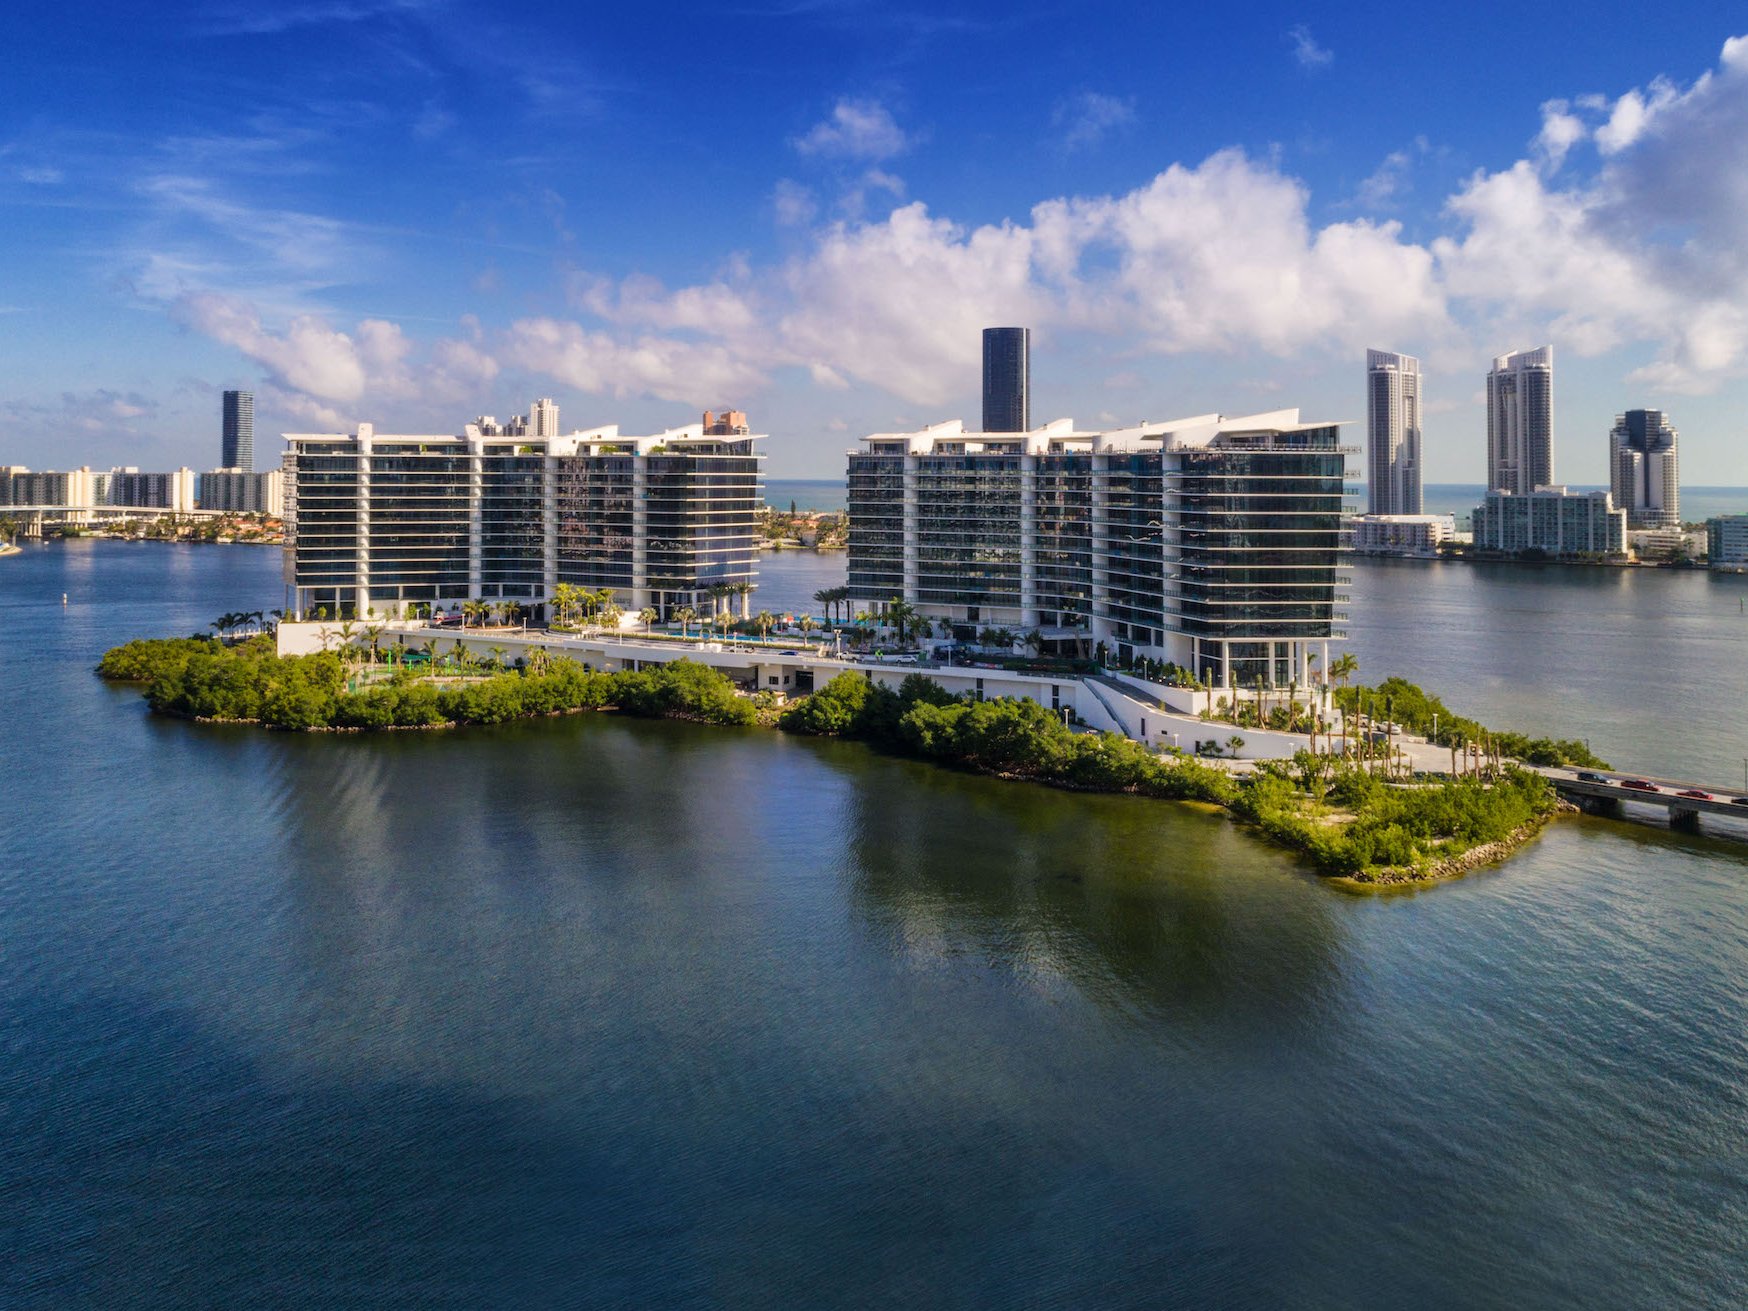 Privé: a man-made island with a private dock for yachts and high-rise homes starts at $2.3 million